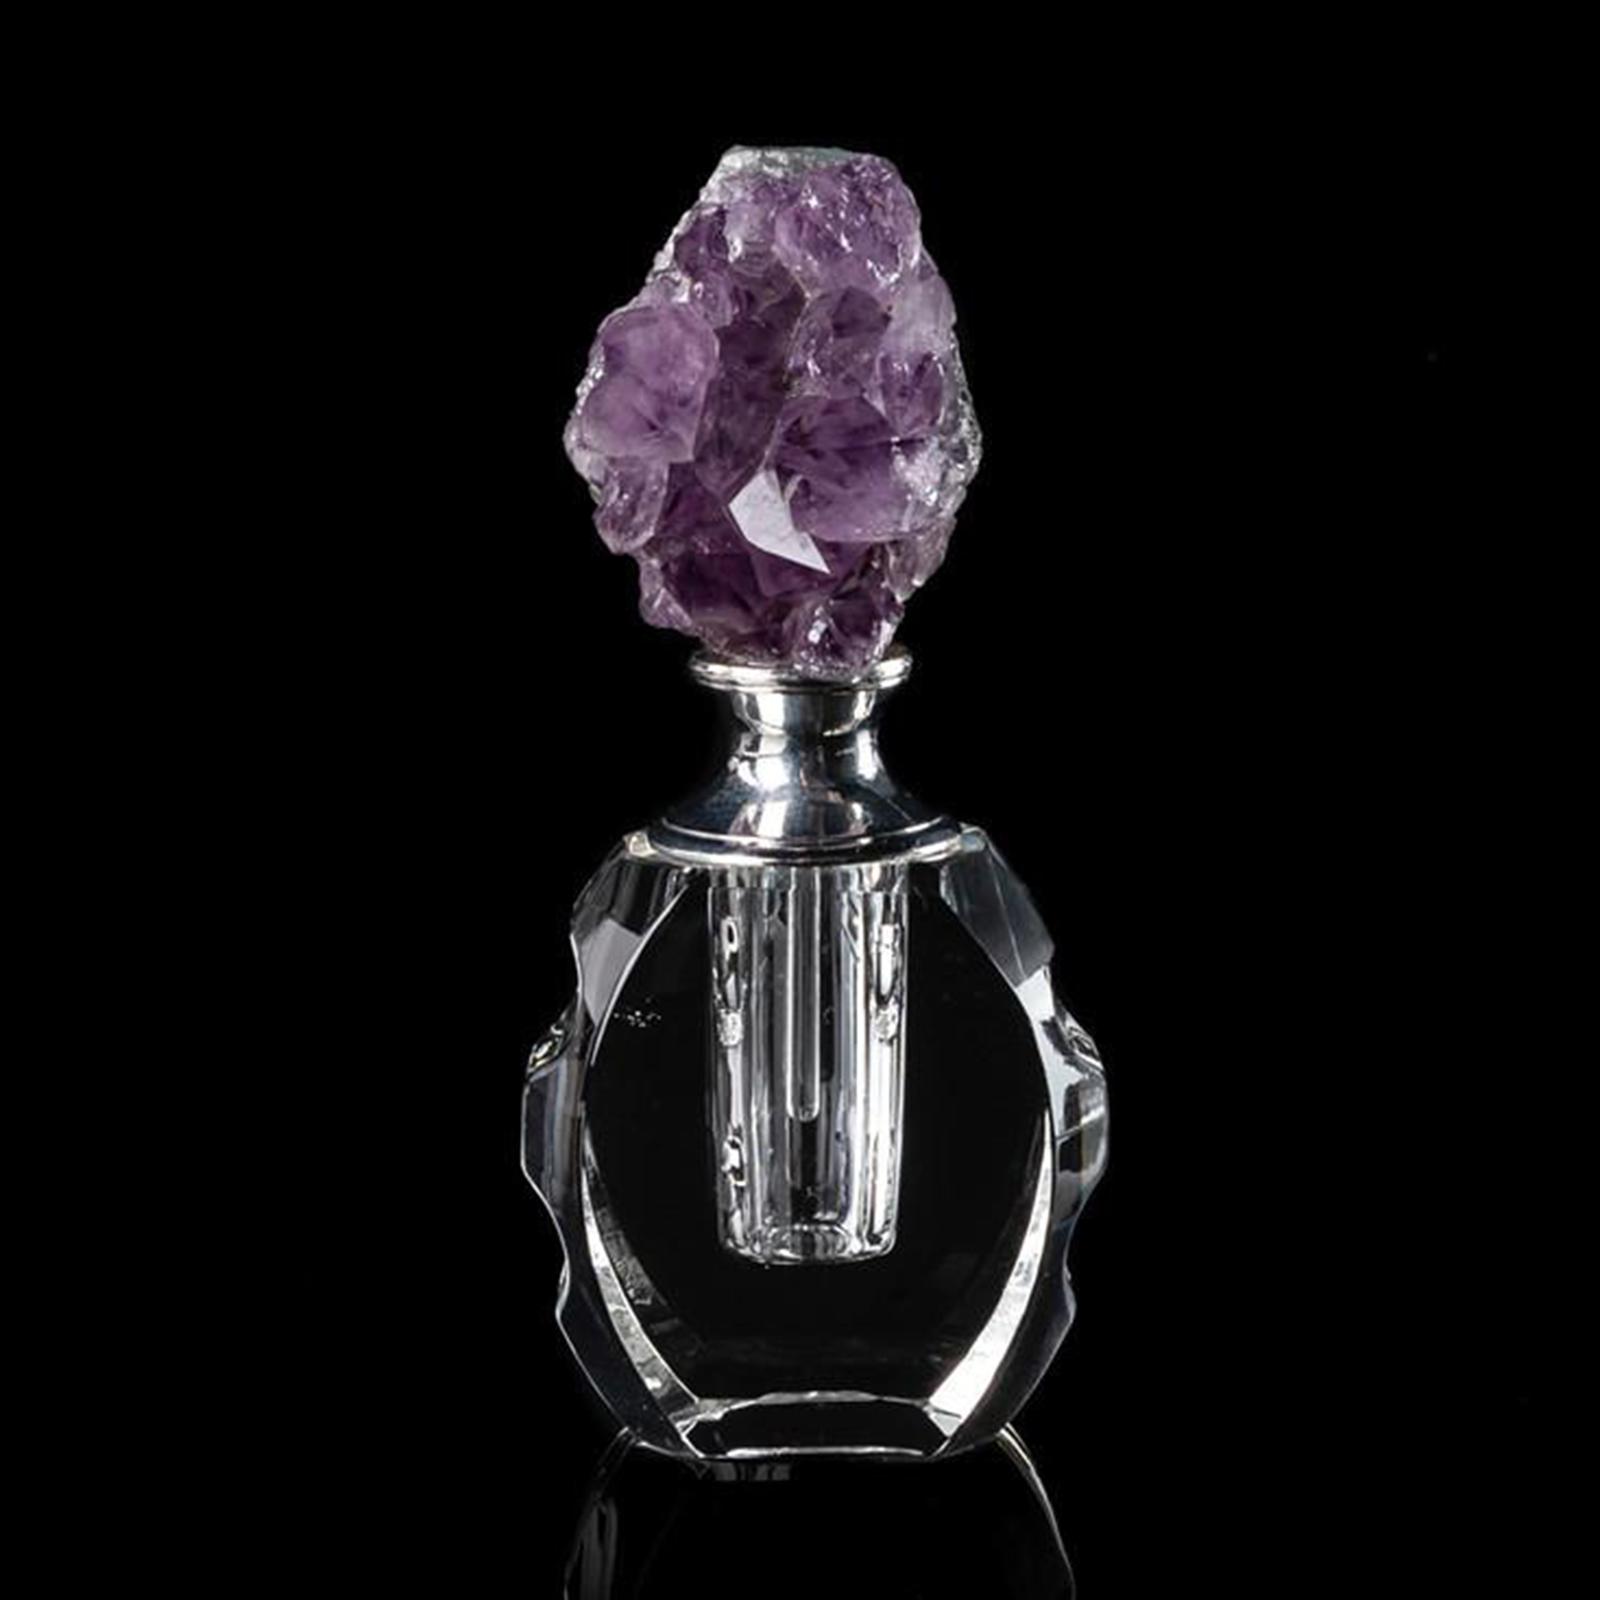 Crystal Empty Refillable Perfume Glass Bottle Home Decor Women Lady's Gifts